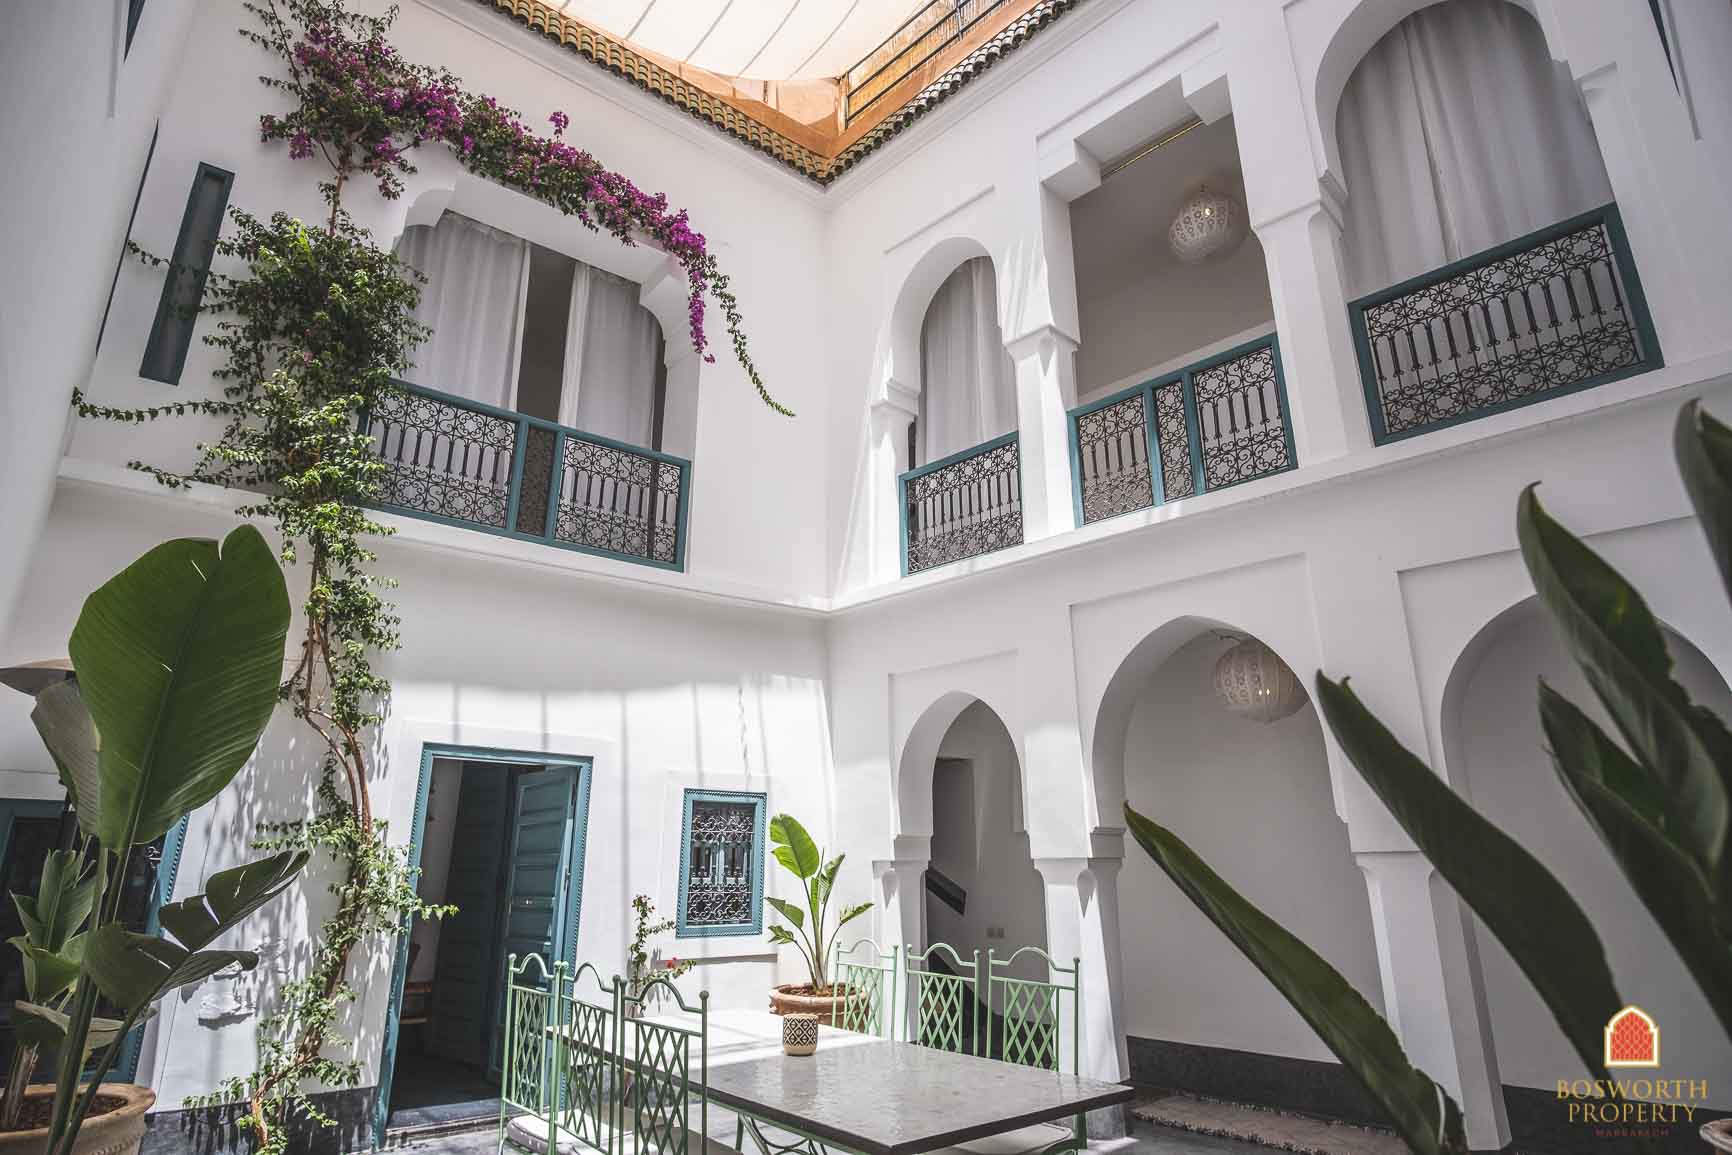 Perfect Pied a Terre Riad For Sale Marrakech - Riads For Sale Marrakech - 马拉喀什房地产 - immobilier marrakech - riads a vendre marrakech